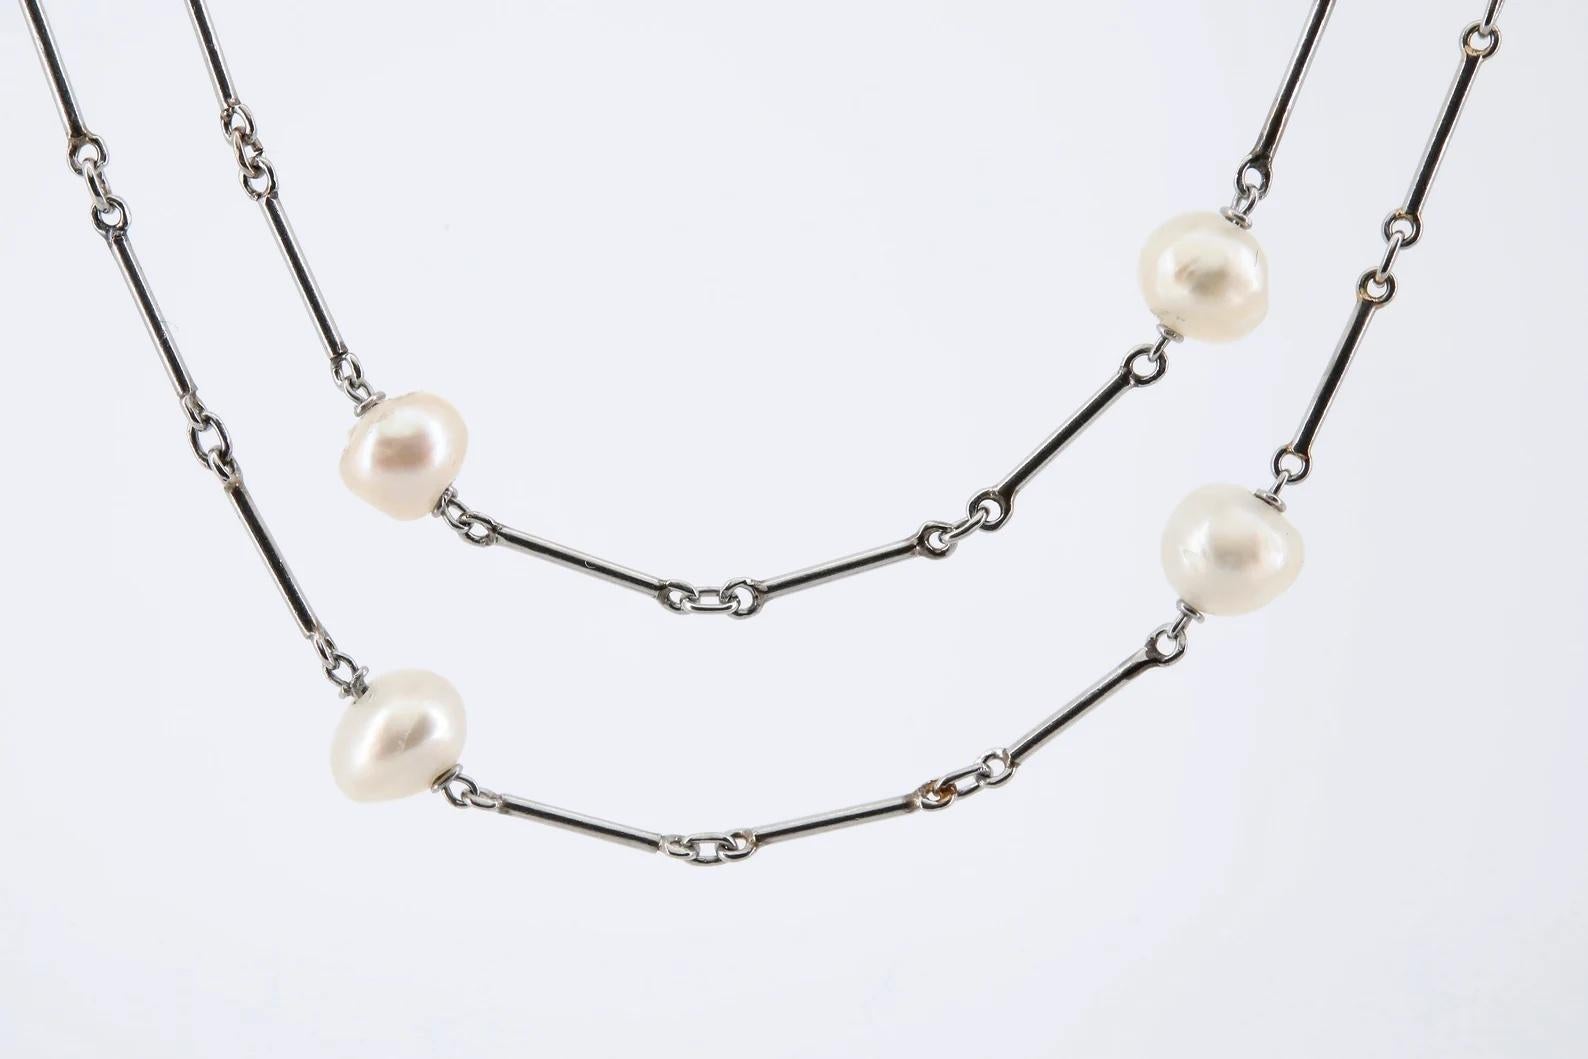 An original Art Deco period natural saltwater pearl necklace on platinum chain.

Featuring 20 natural white saltwater pearls with lustrous bright nacres, and measuring an average 5.50 millimeters in diameter.

The pearls stationed on a hand crafted